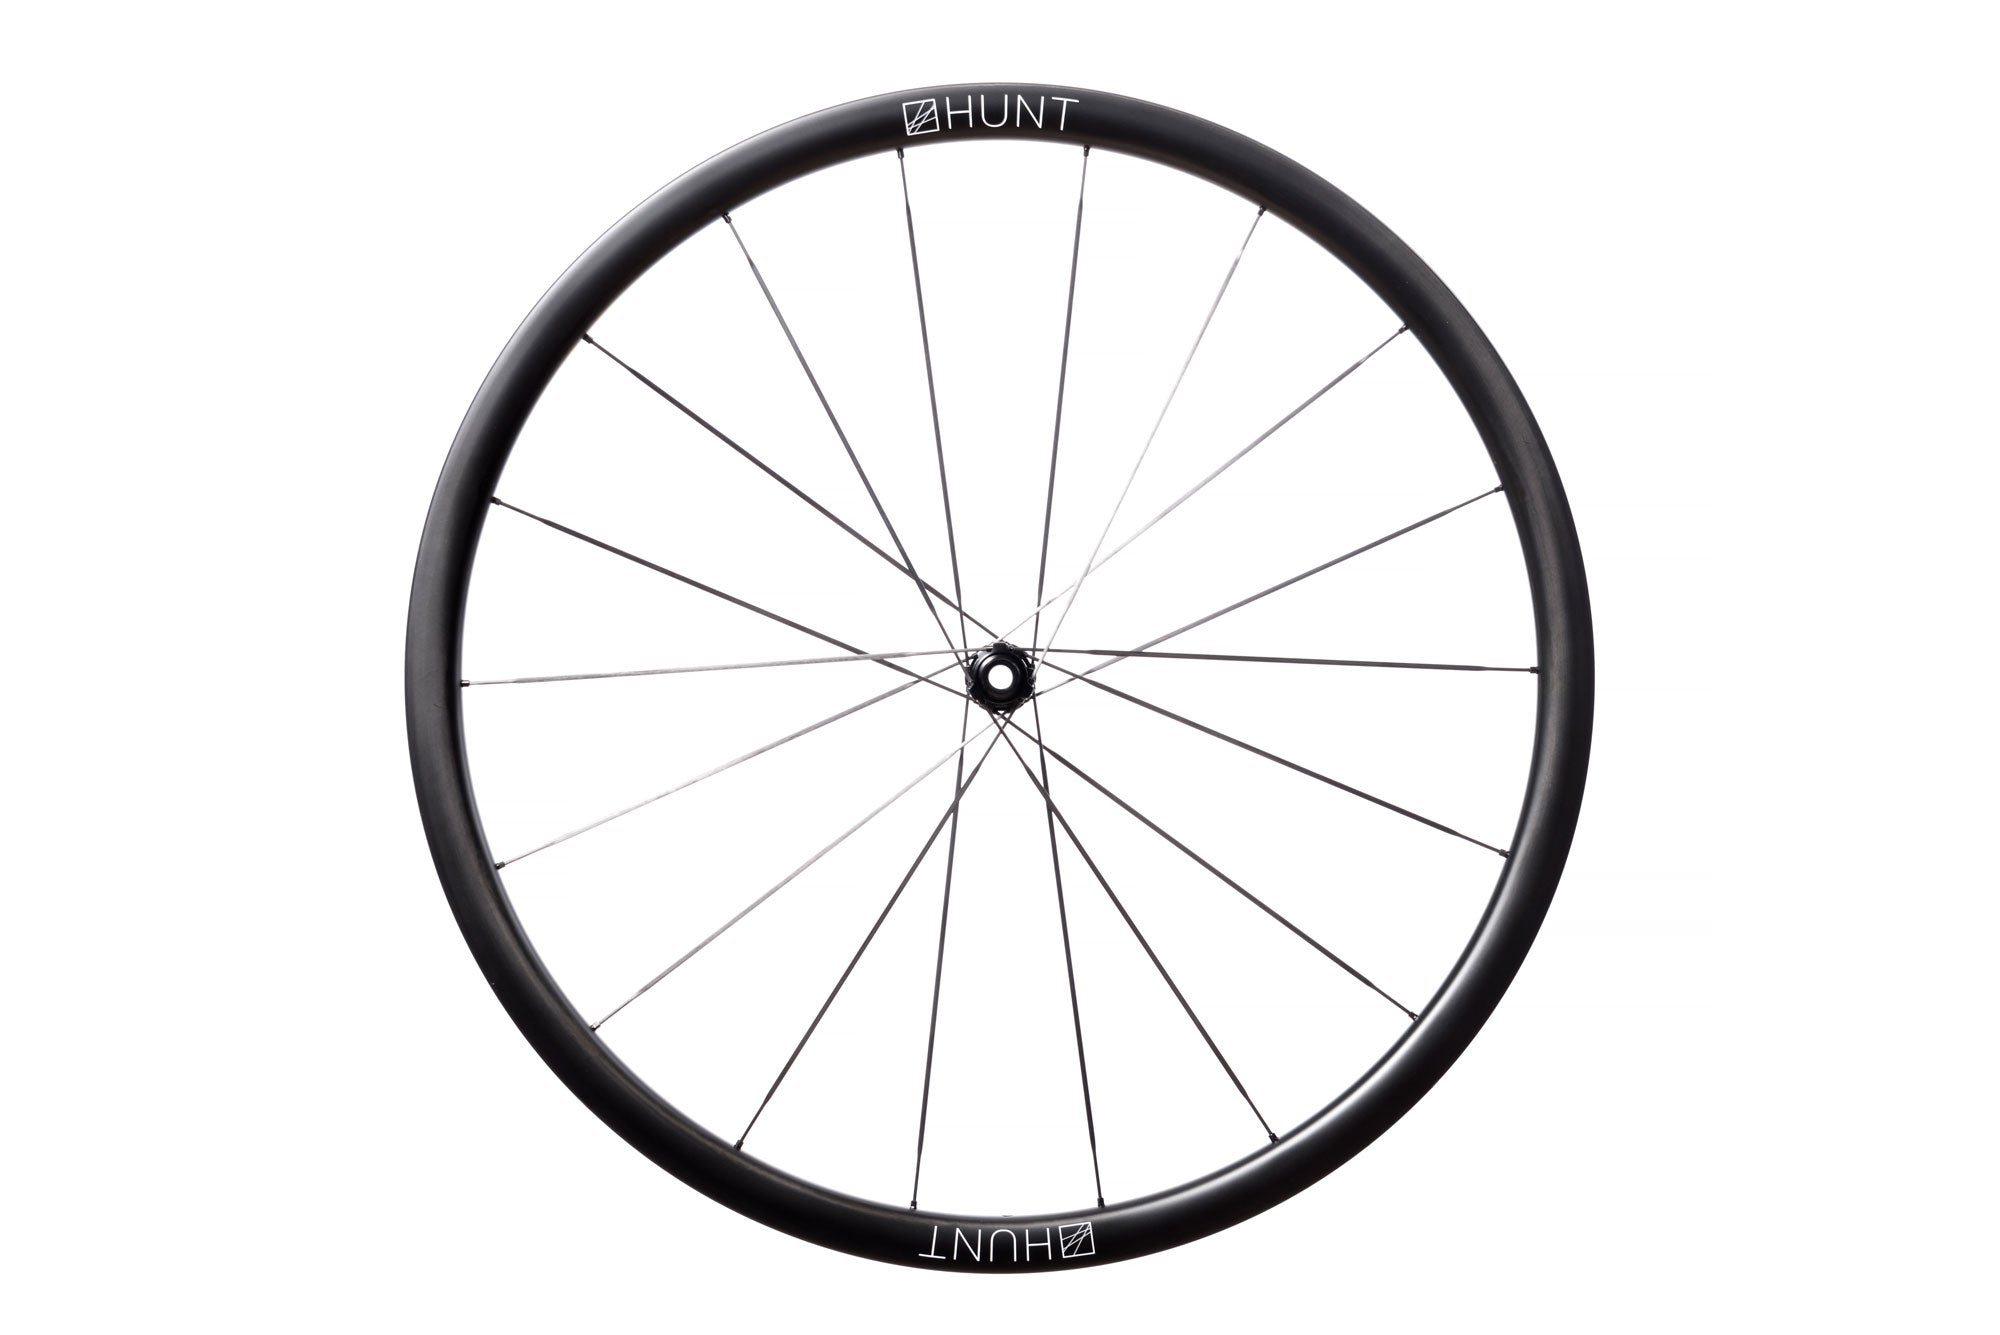 <h1>Rims</h1><i>Ultralight 30mm deep tubular rim with 26mm width, optimized for 23-28c tubular tyres. Developed with input from Andy Feather, 2022 British National Hill Climb Champion. Disc-specific tubular profile. Important; please note these are for Tubular tyres only and will not work with normal Clincher or Tubeless tyres.</i>